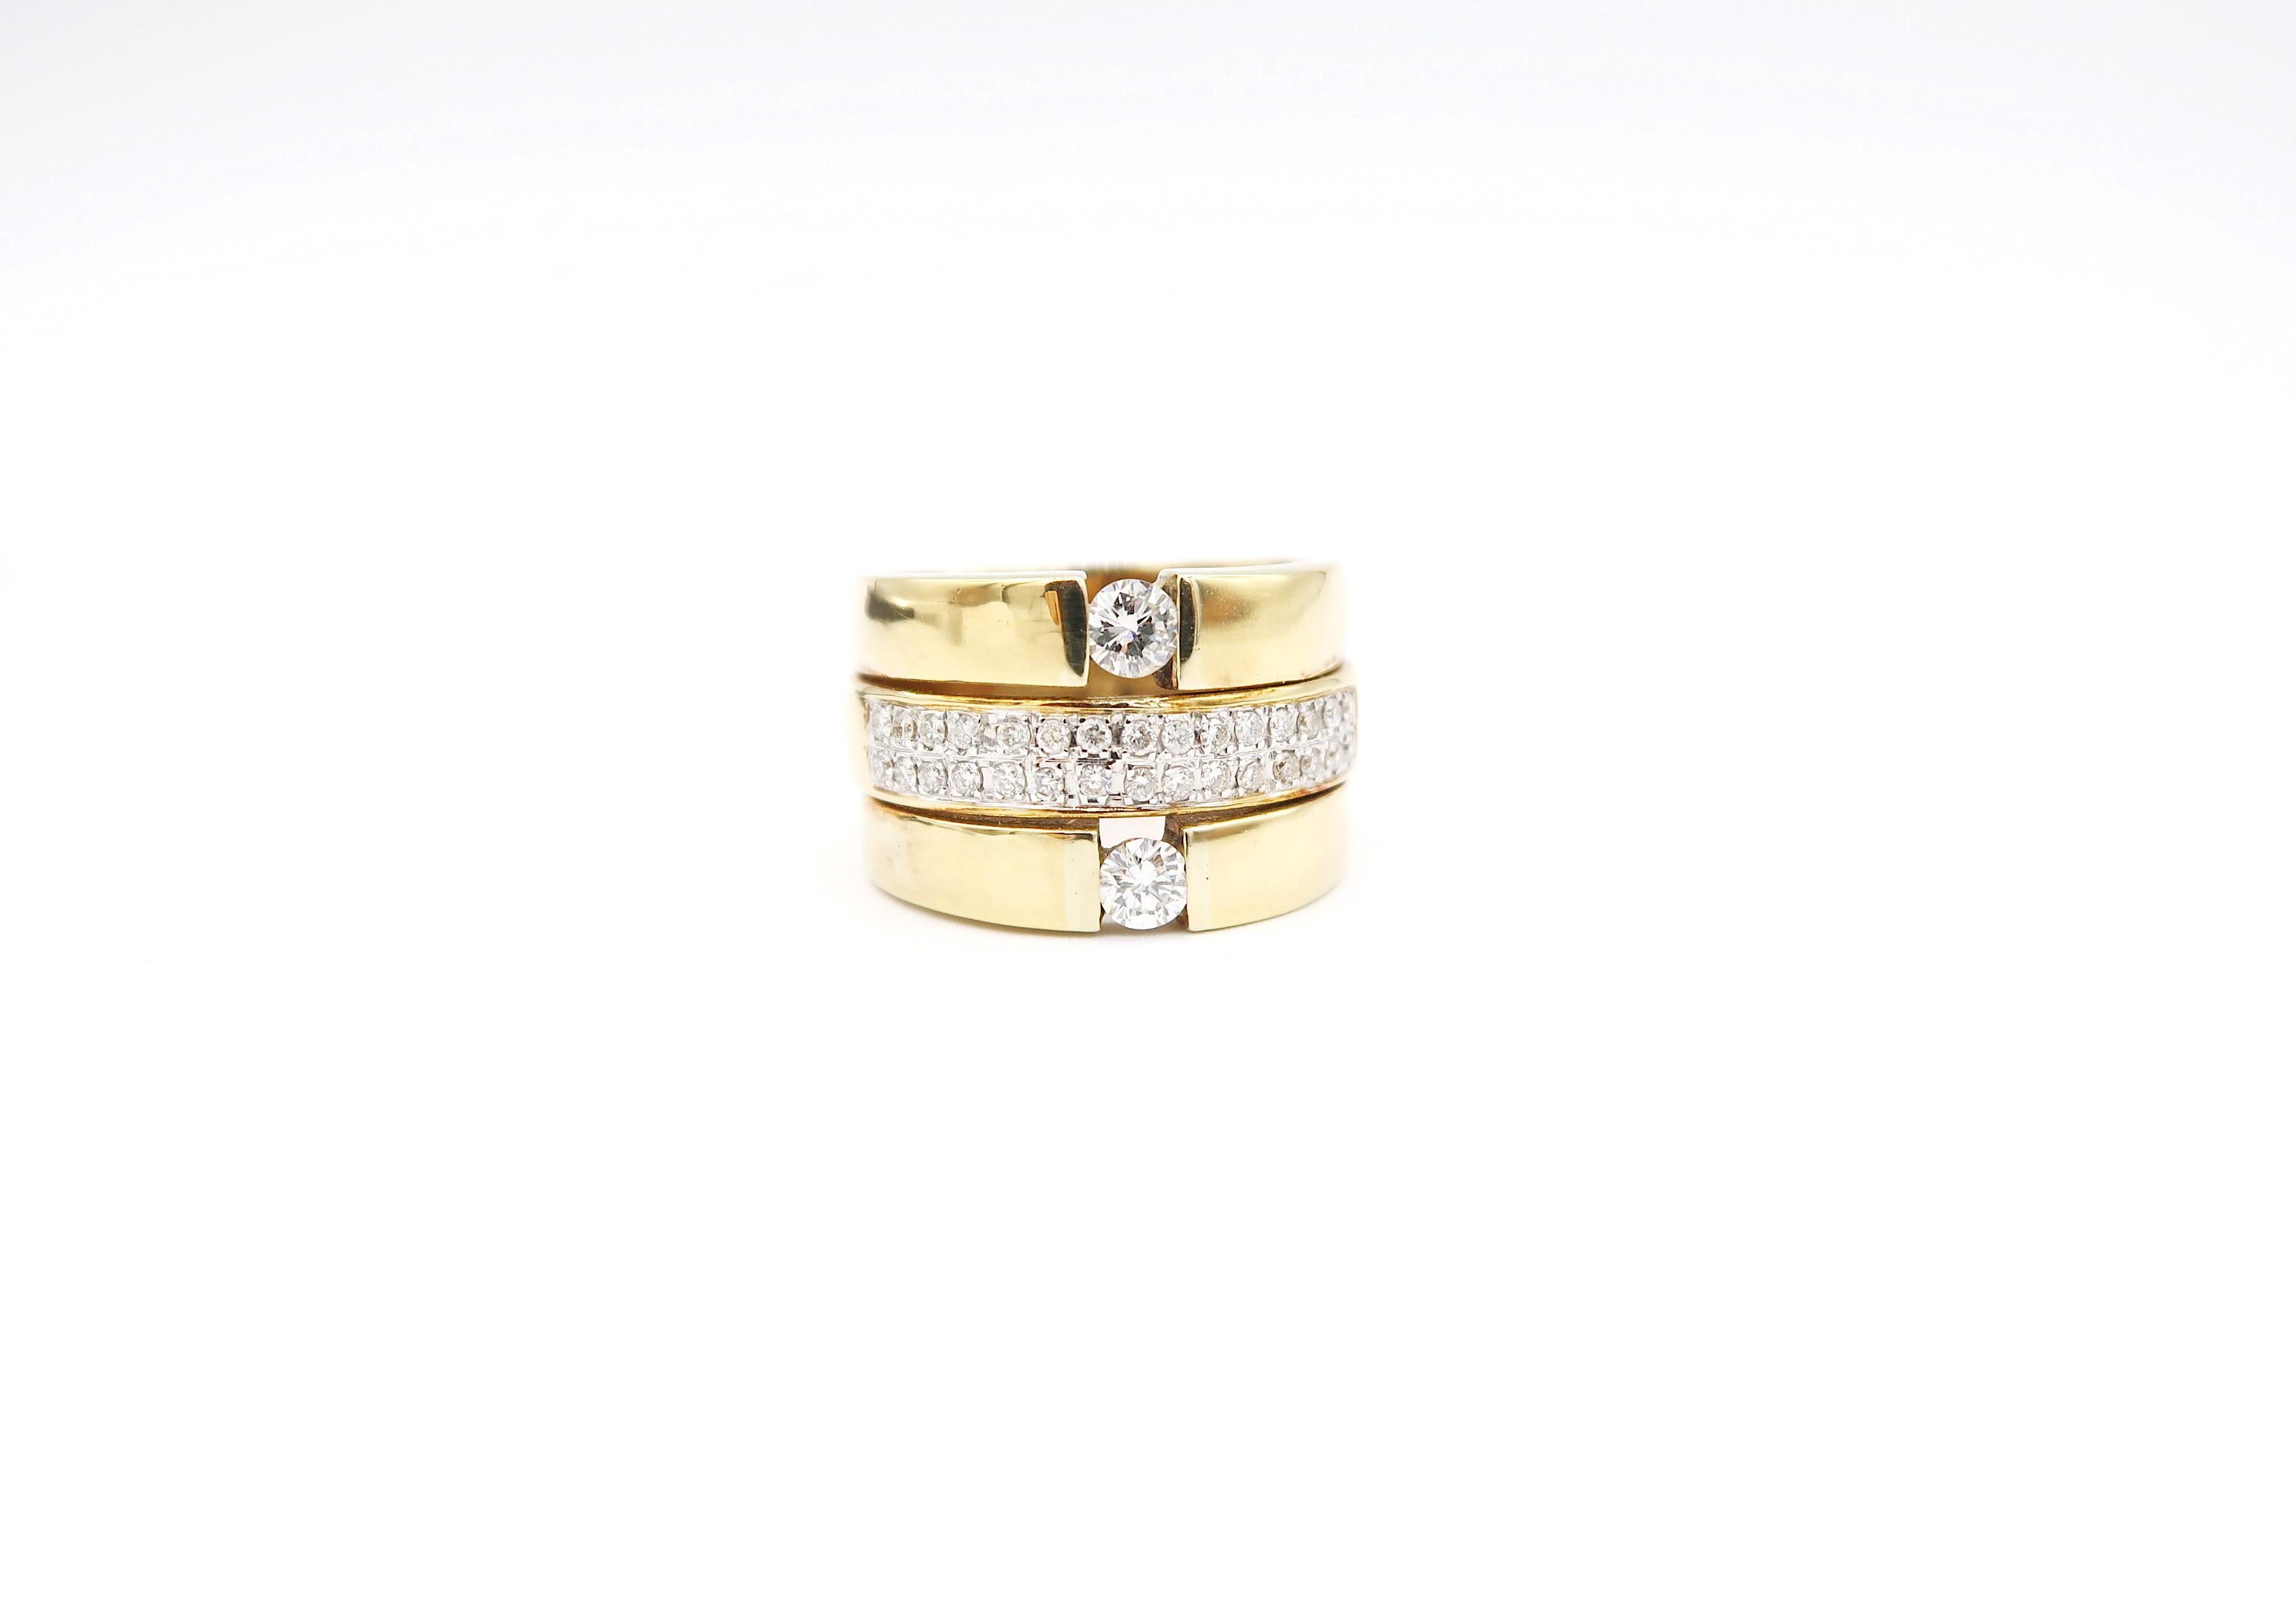 Diamond Pavé Band Sandwiched by Diamond Solitaire 18 Karat Yellow Gold Band Ring

Ring size: 55, UK N 1/2, US 7 1/2
Width: 0.5 inch

Gold: 18K 11.53g.
Diamond: 0.54ct.